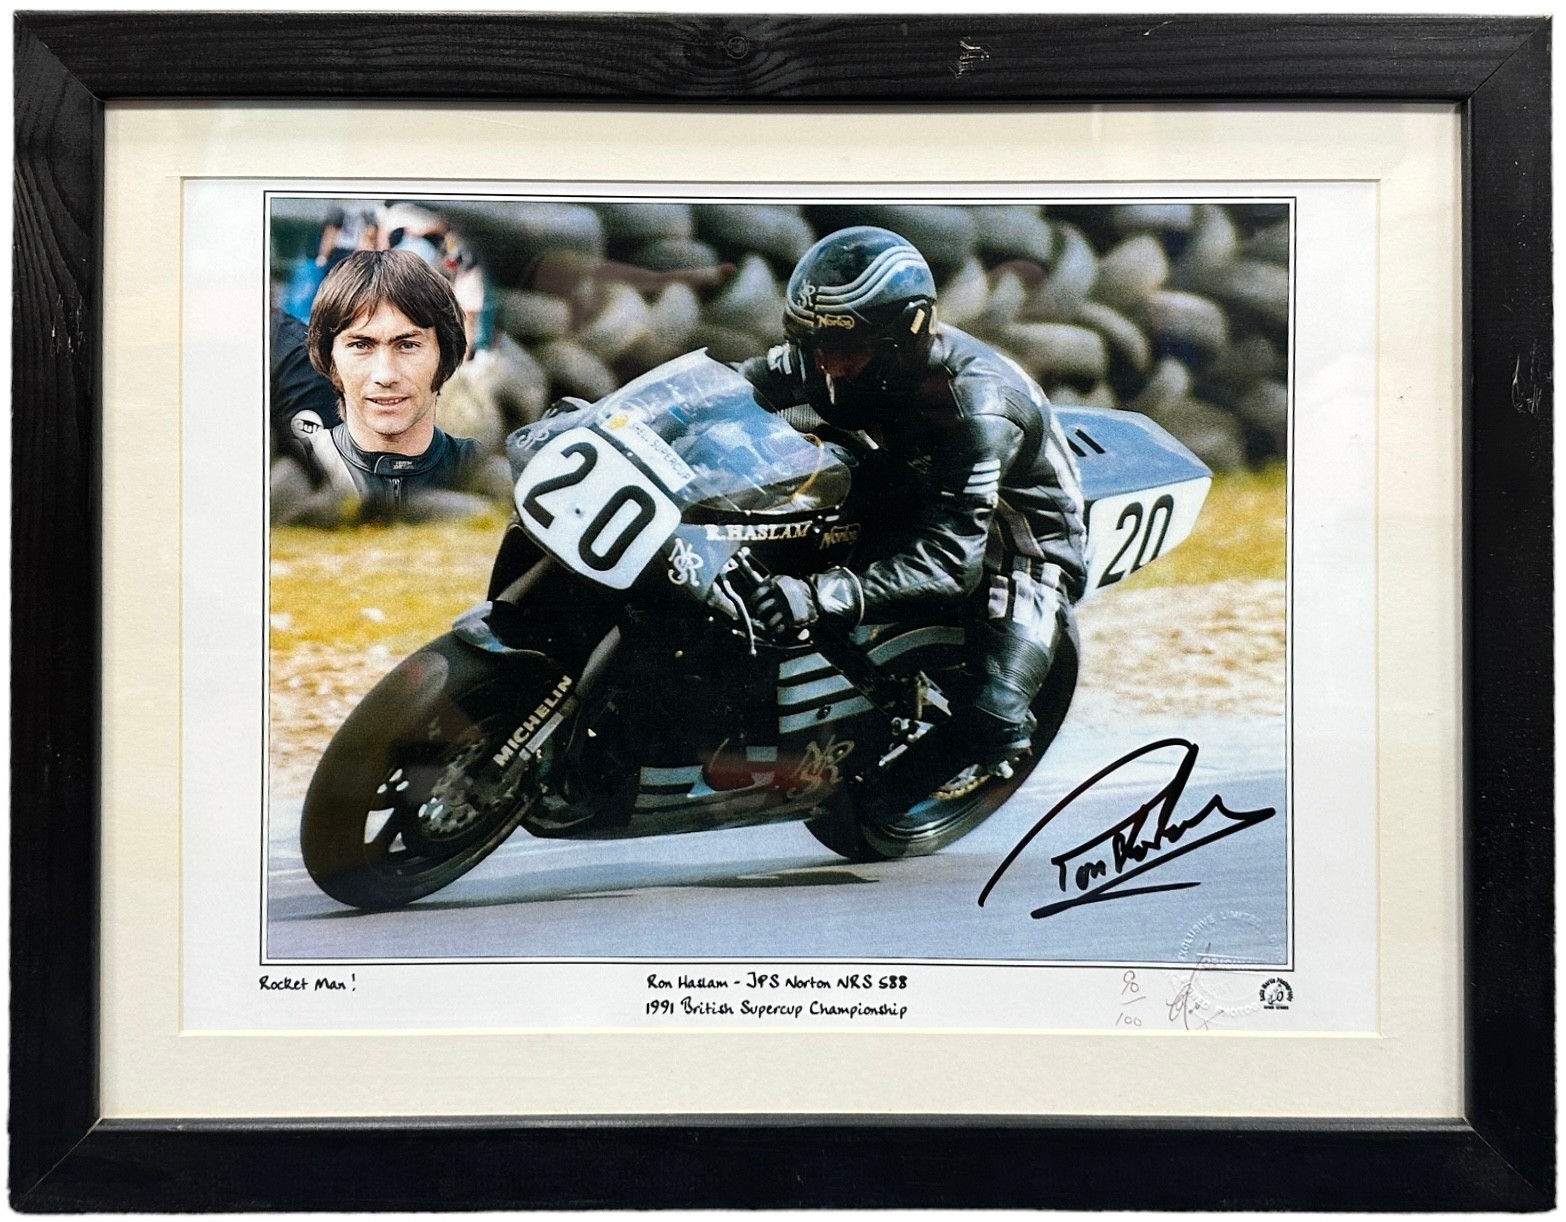 Framed signed Ron Haslam picture. Ron Haslam on his JPS Norton NRS 588, during the 1991 British - Image 2 of 3